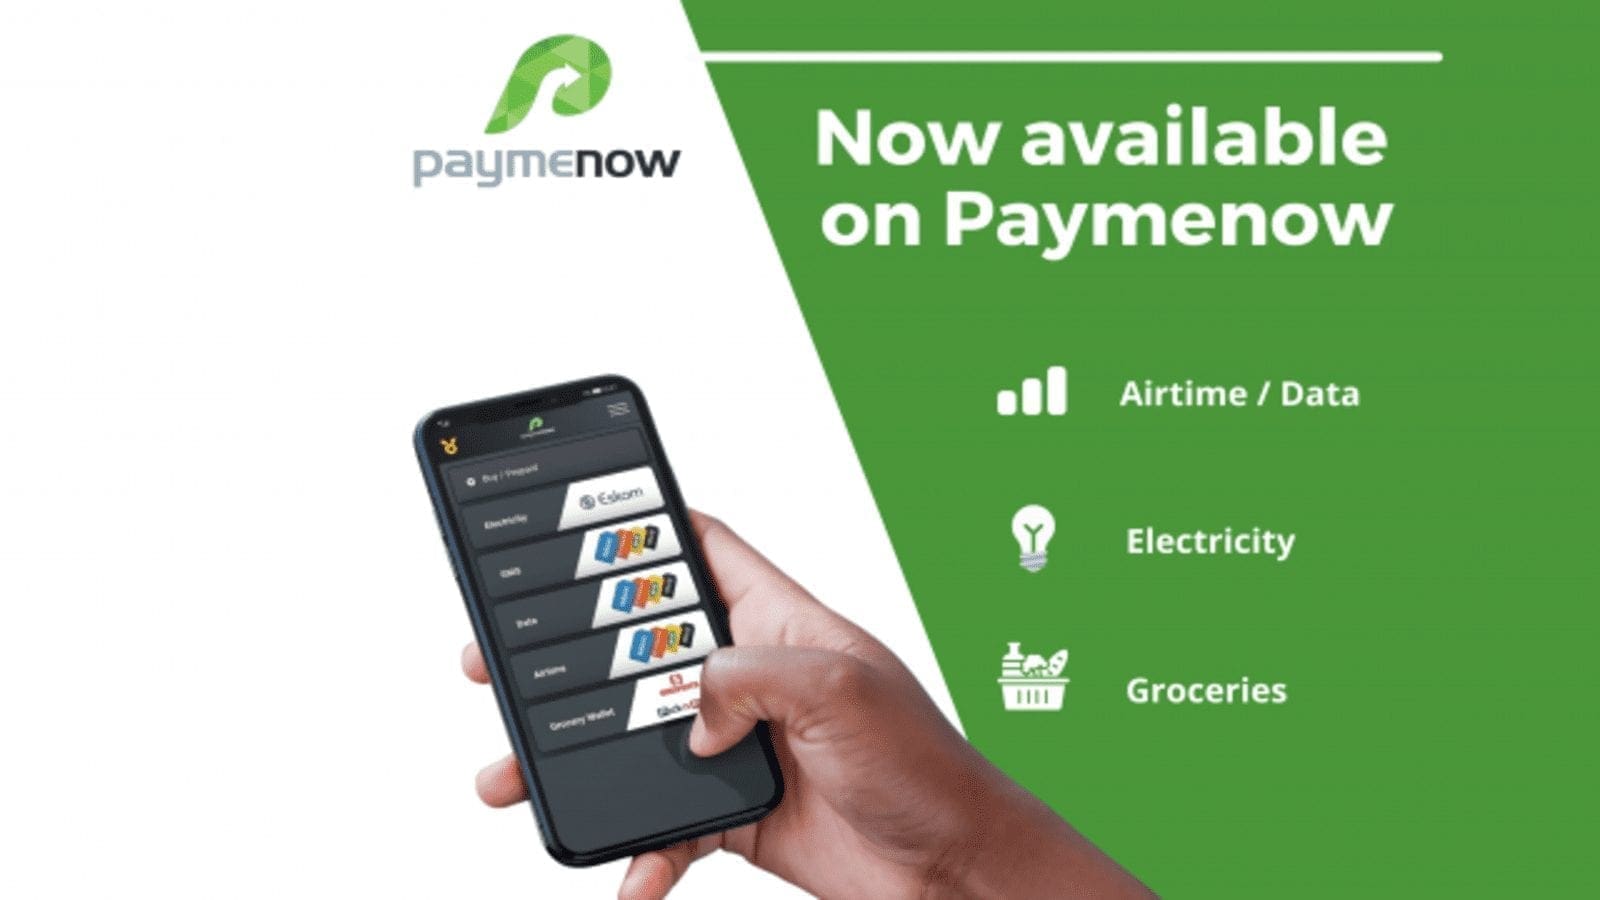 SA retailer Shoprite offers seamless grocery purchase to Paymenow app users